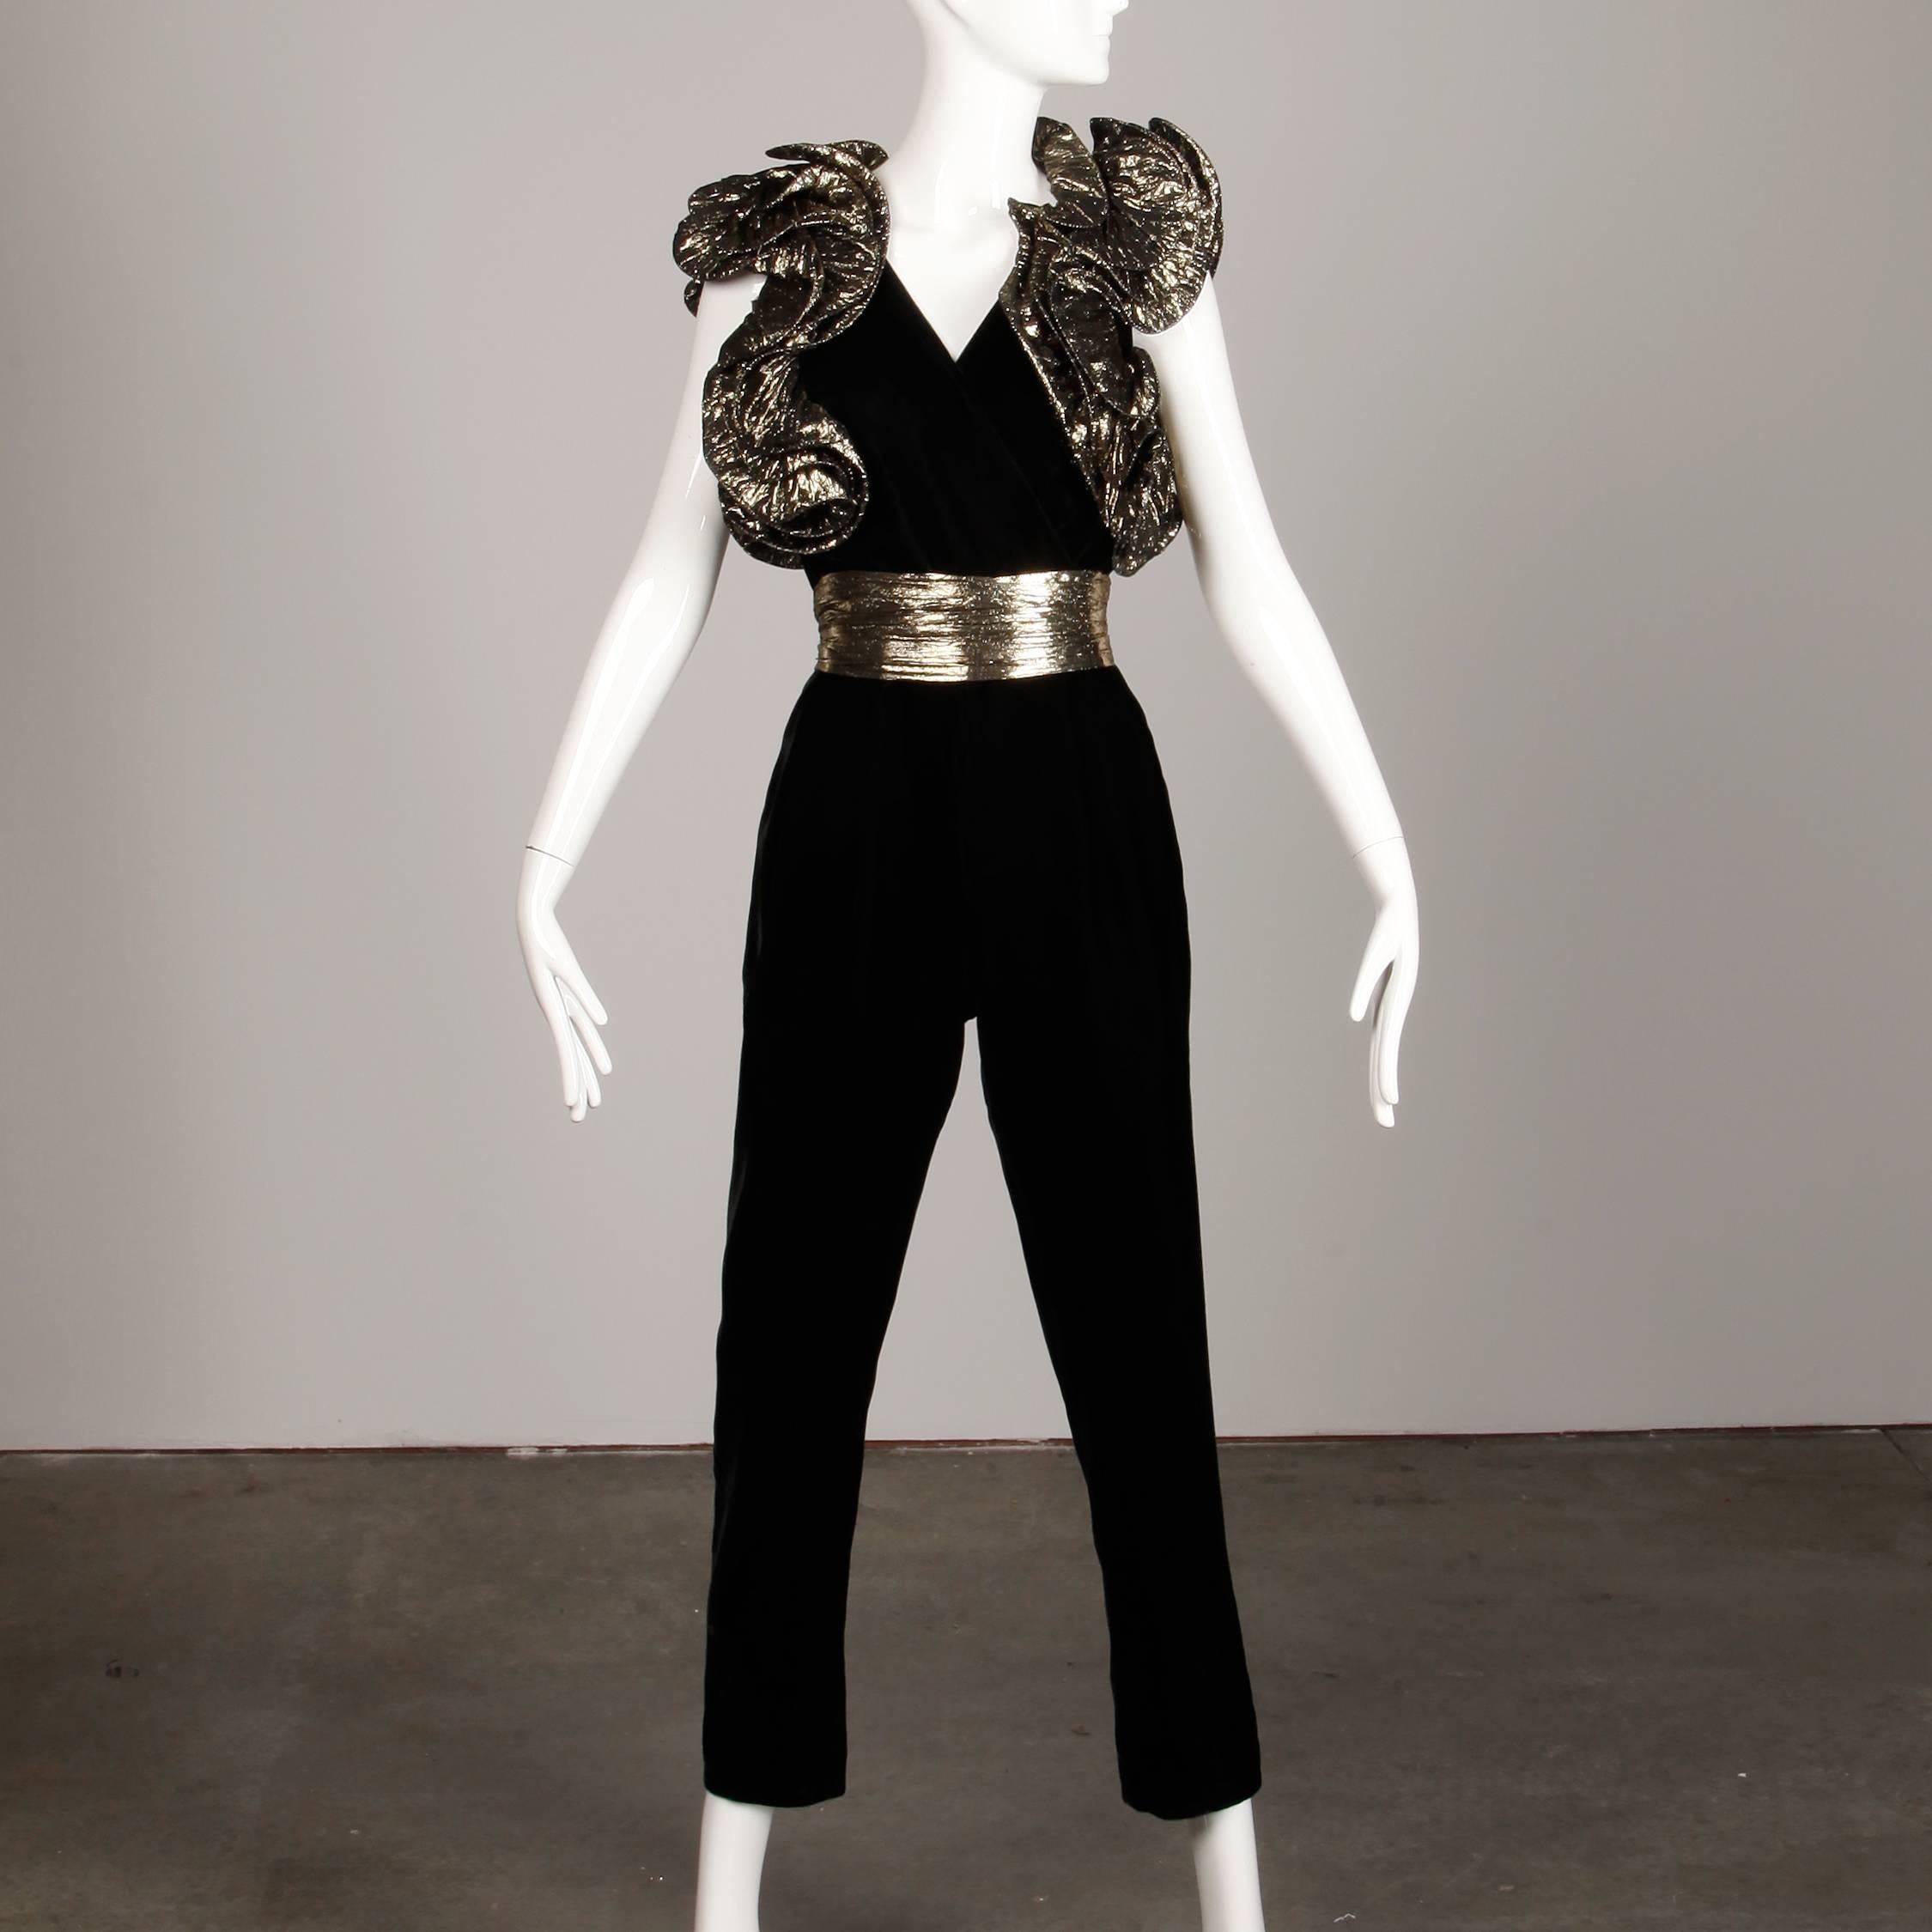 Amazing 1980s vintage jumpsuit with metallic gold lamé ruffled shoulders and belt. Unlined with rear zip closure. 100% rayon. The bust measures 42", waist 26", hips 38", front rise 13.5", back rise 15", inseam 27" and